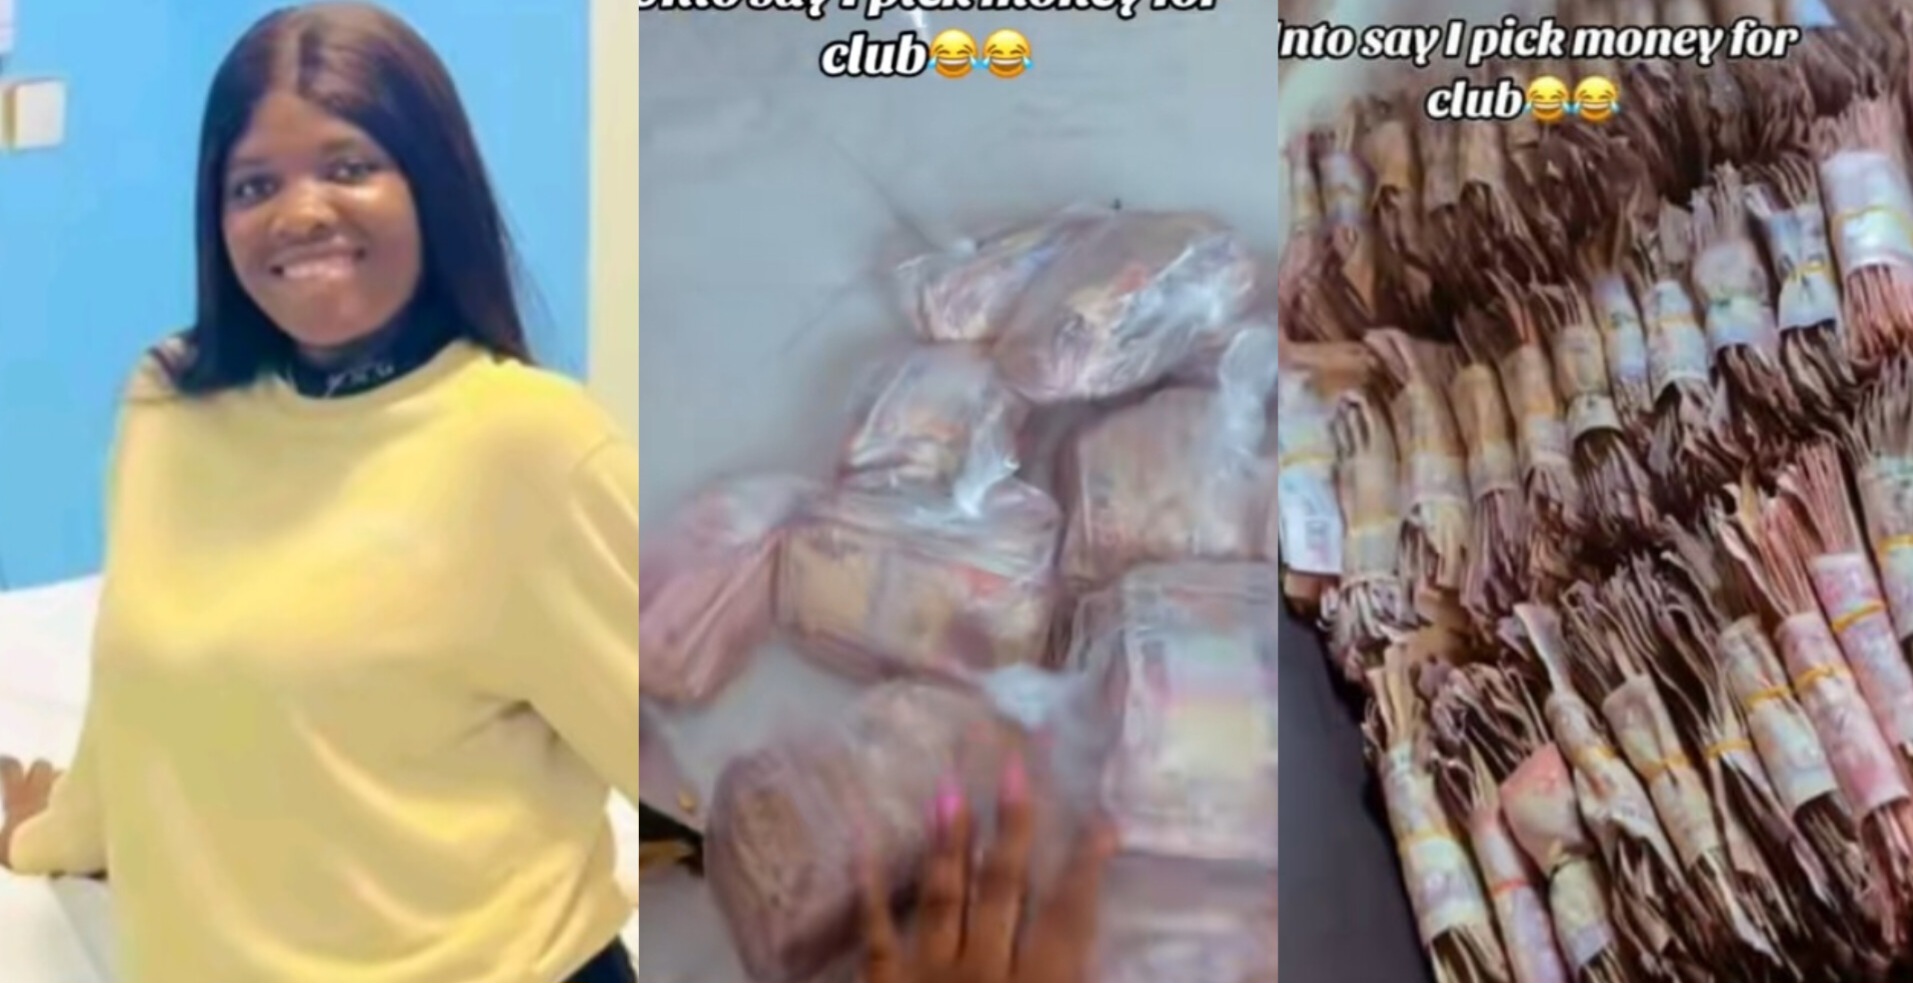 A Nigerian lady finds and proudly shows off ₦100 notes she picked up in nightclubs.